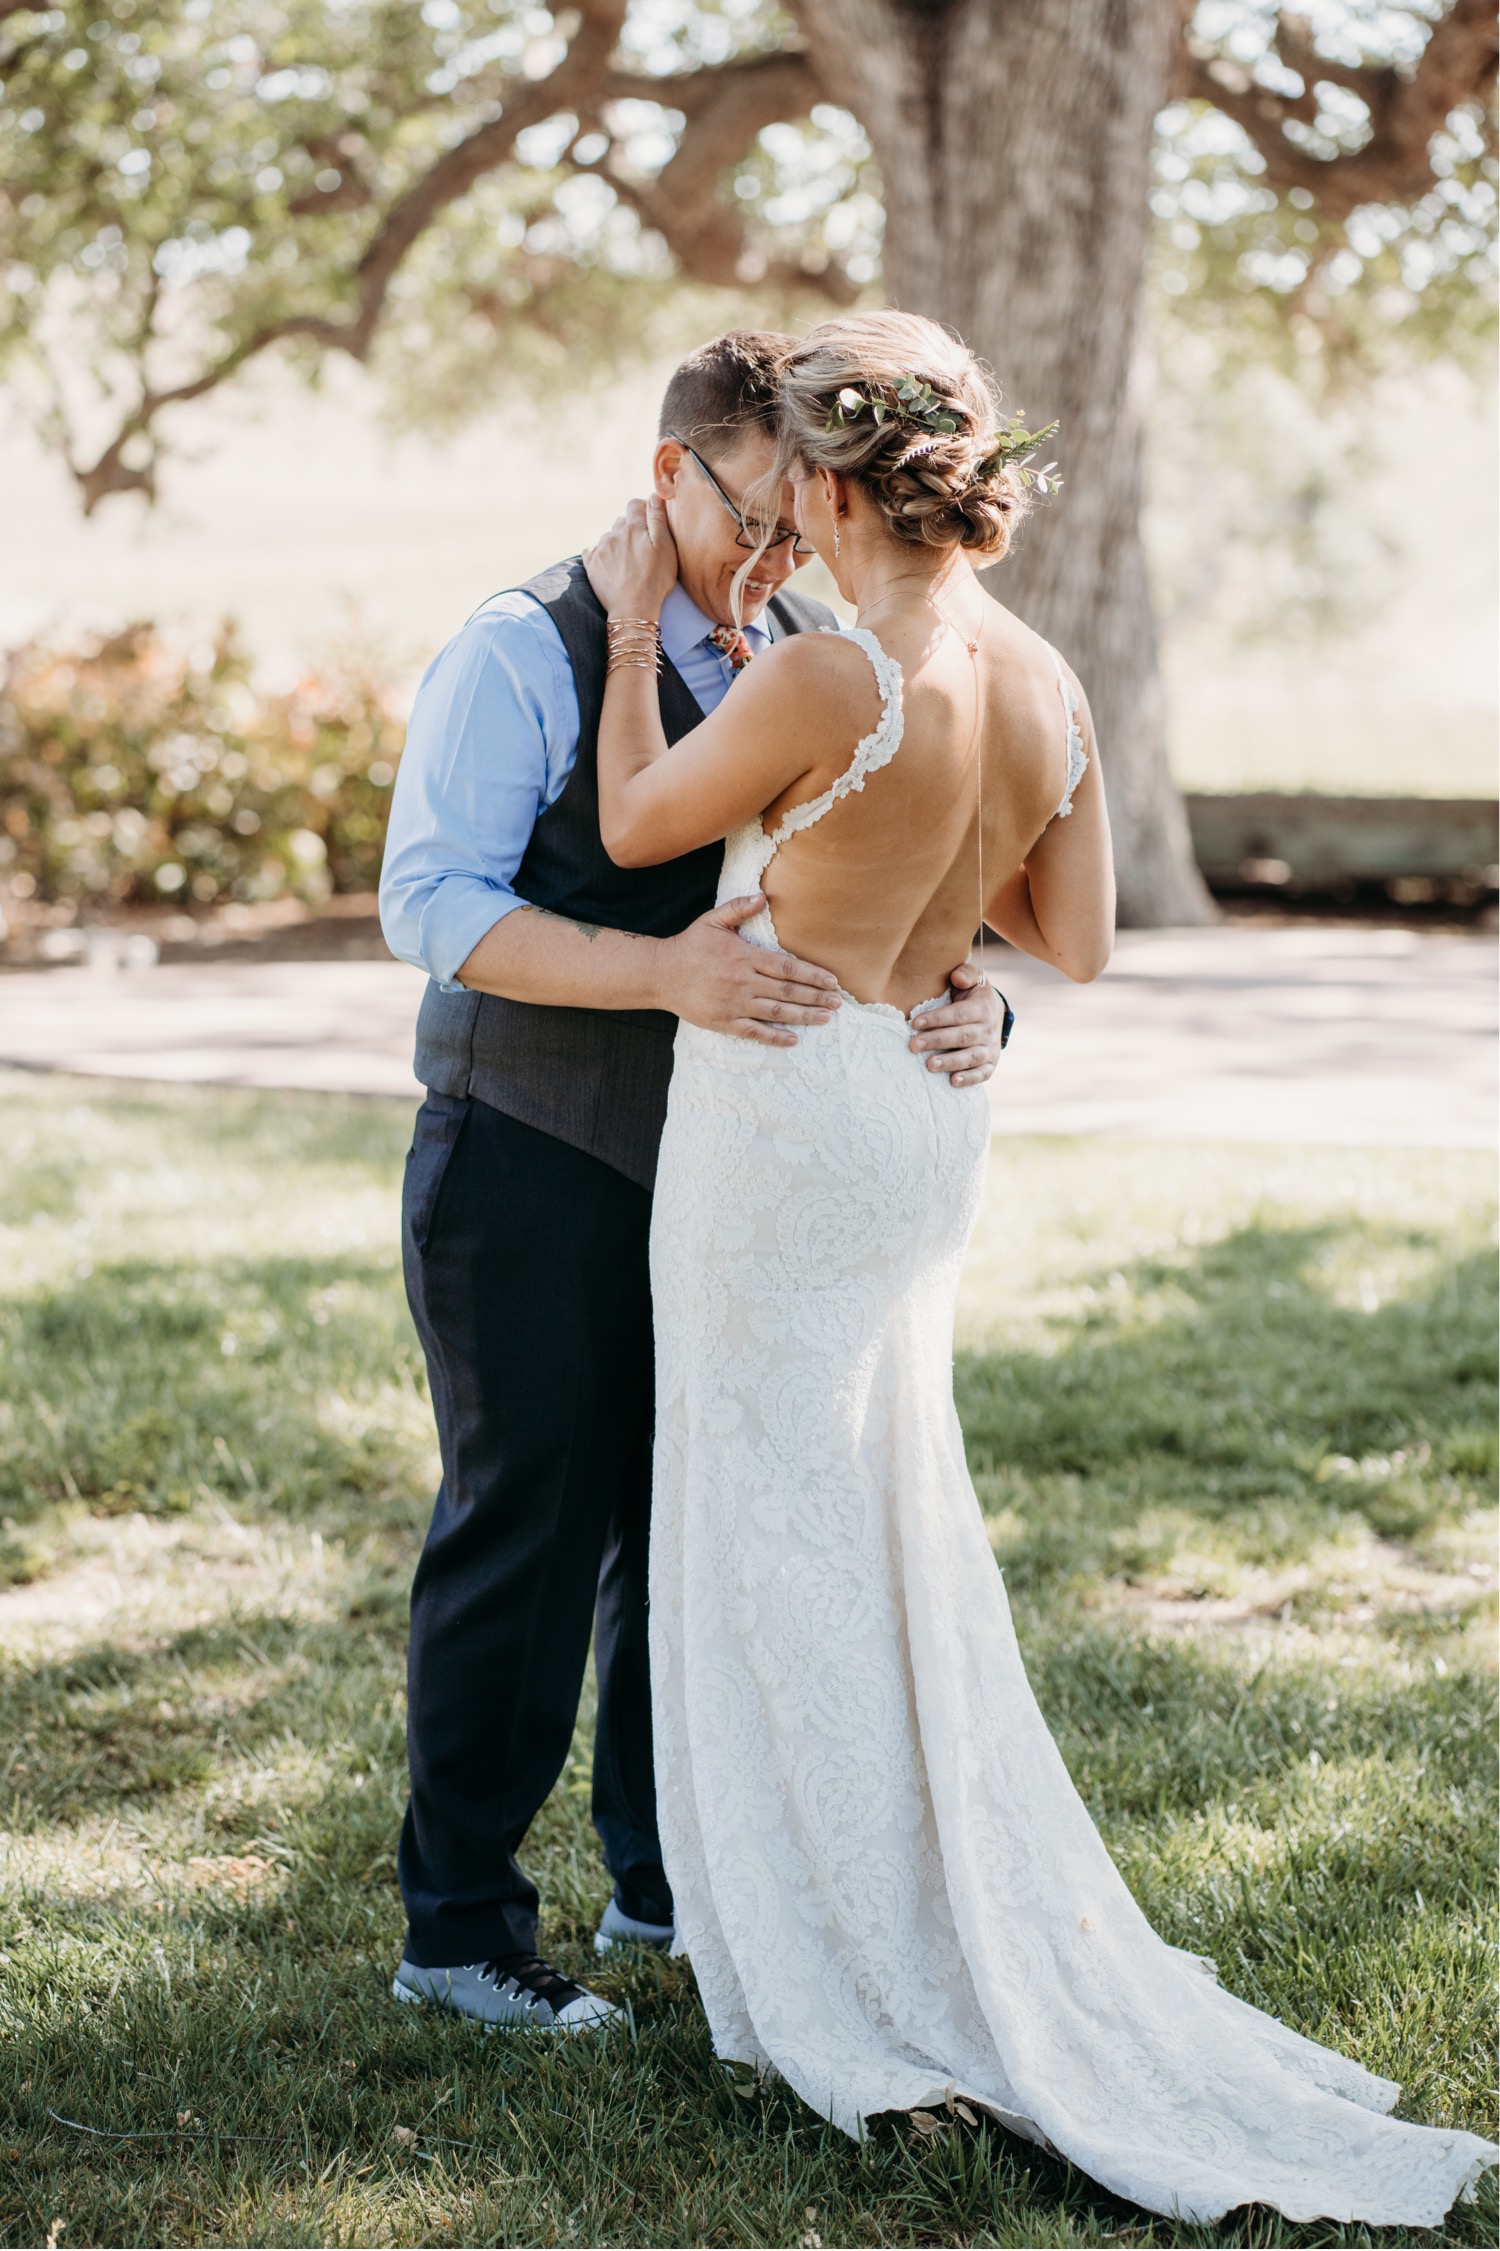 Brides hug each other after a first look photoshoot before their California winery wedding. Liz Koston Photography.